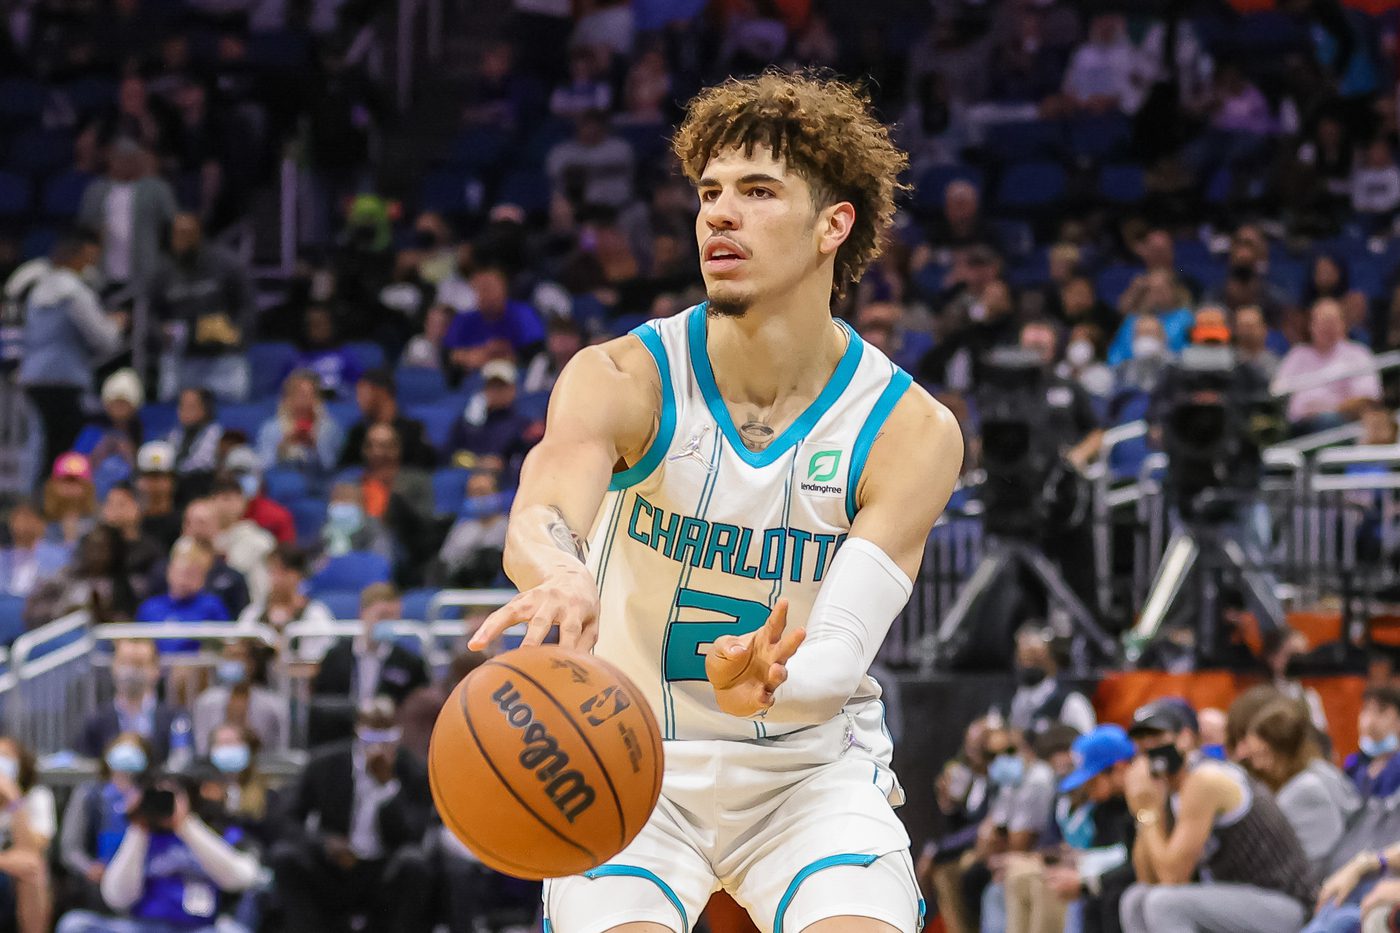 Nov 24, 2021; Orlando, Florida, USA; Charlotte Hornets guard LaMelo Ball (2) passes the ball during the first quarter against the Orlando Magic at Amway Center. Mandatory Credit: Mike Watters-USA TODAY Sports